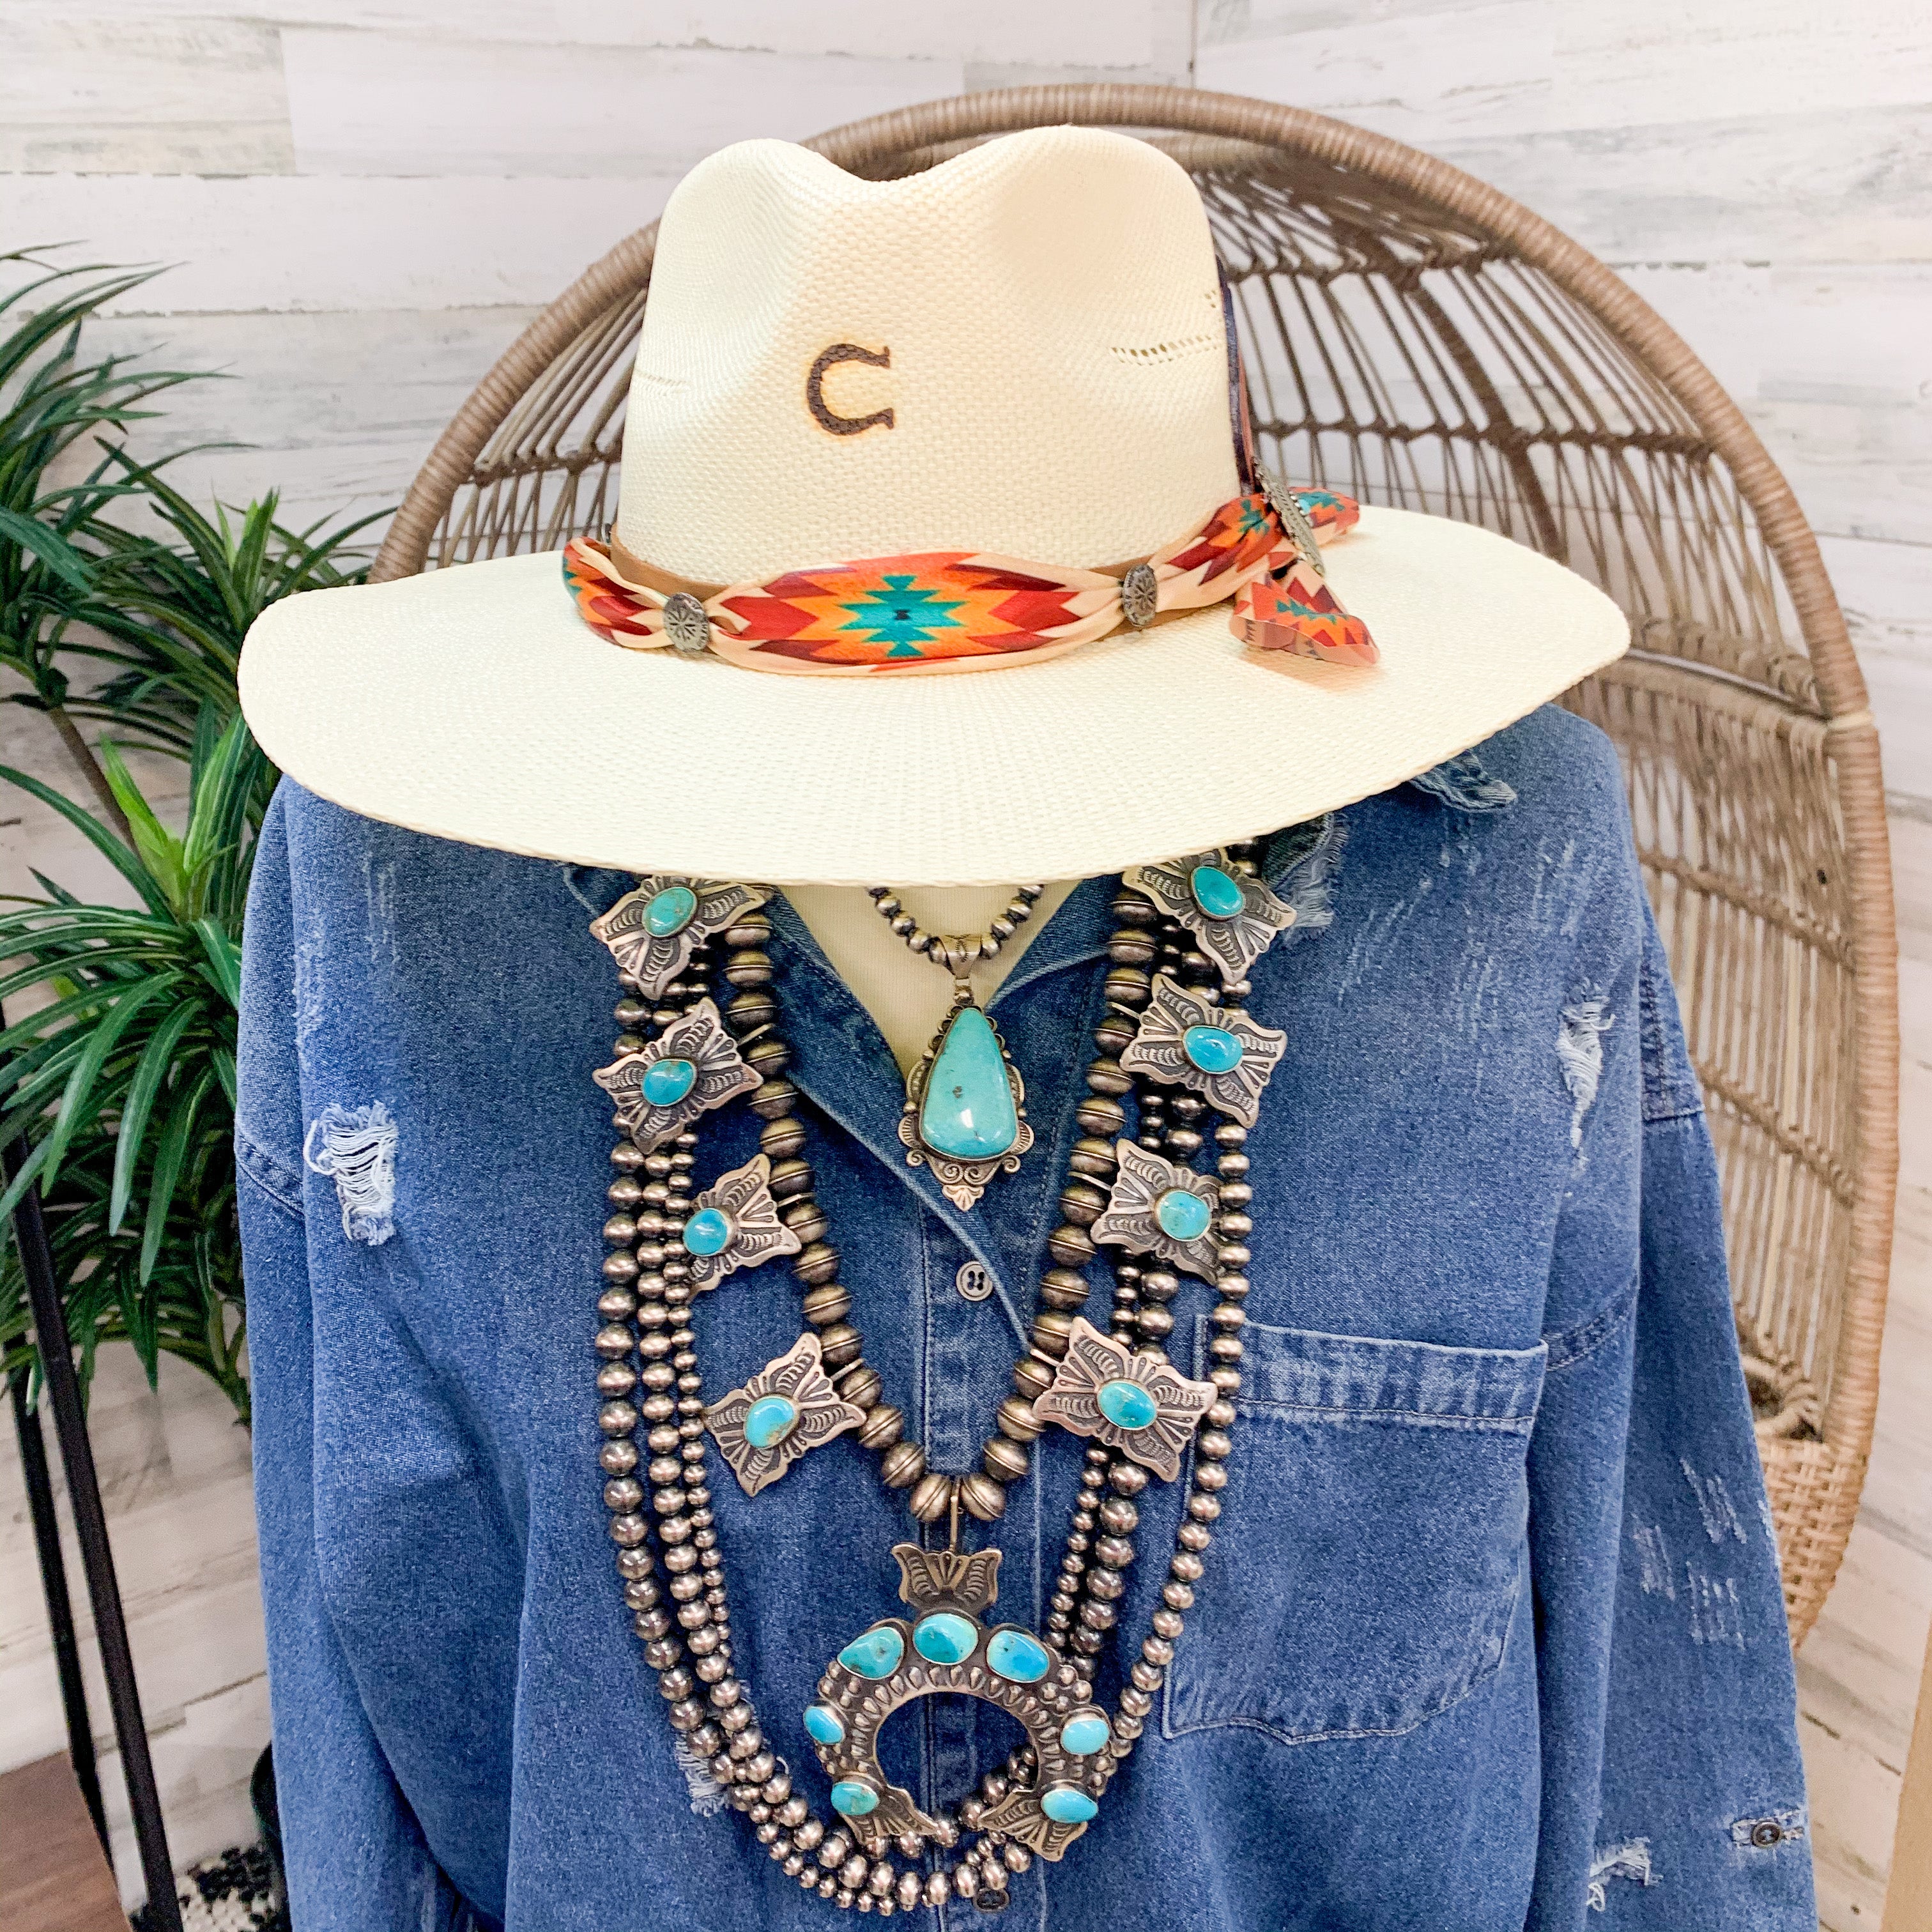 Charlie 1 Horse | Navajo Flat Brim Straw Hat with Tribal Scarf and Leather Feathers - Giddy Up Glamour Boutique